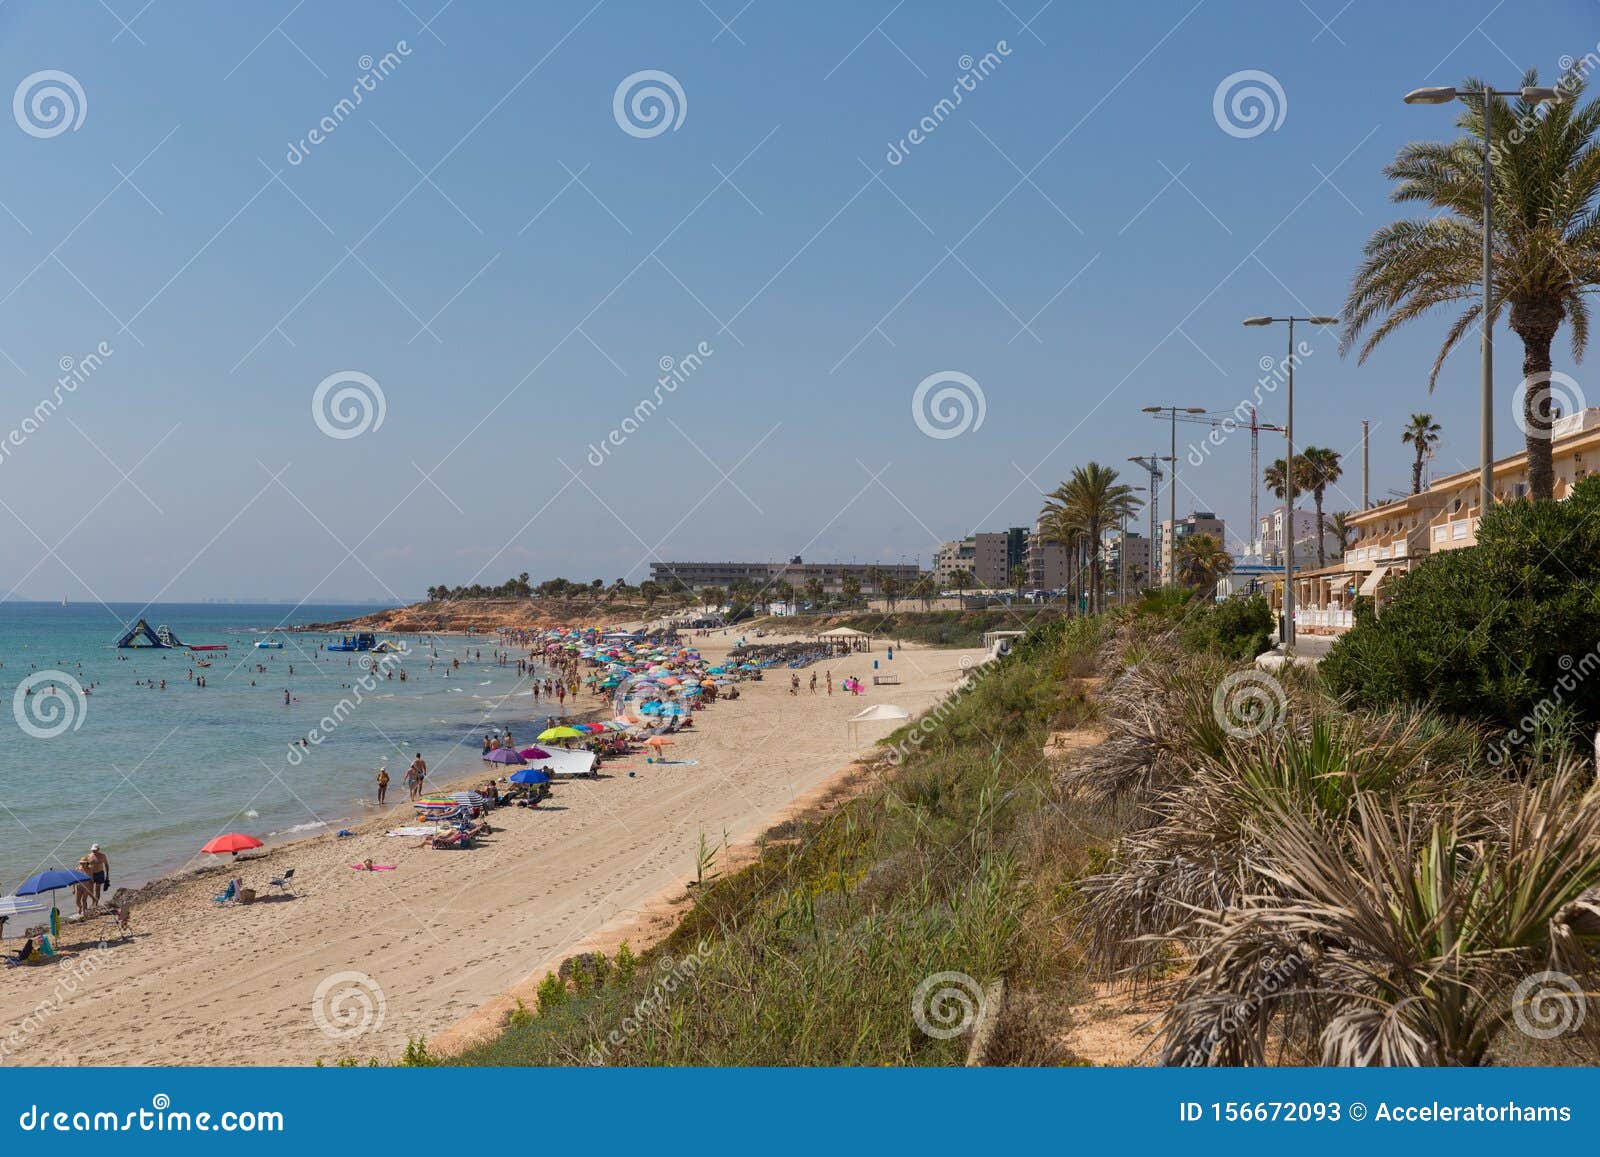 mil palmeras beach costa blanca spain with palm trees and holidaymakers with parasols in beautiful summer weather